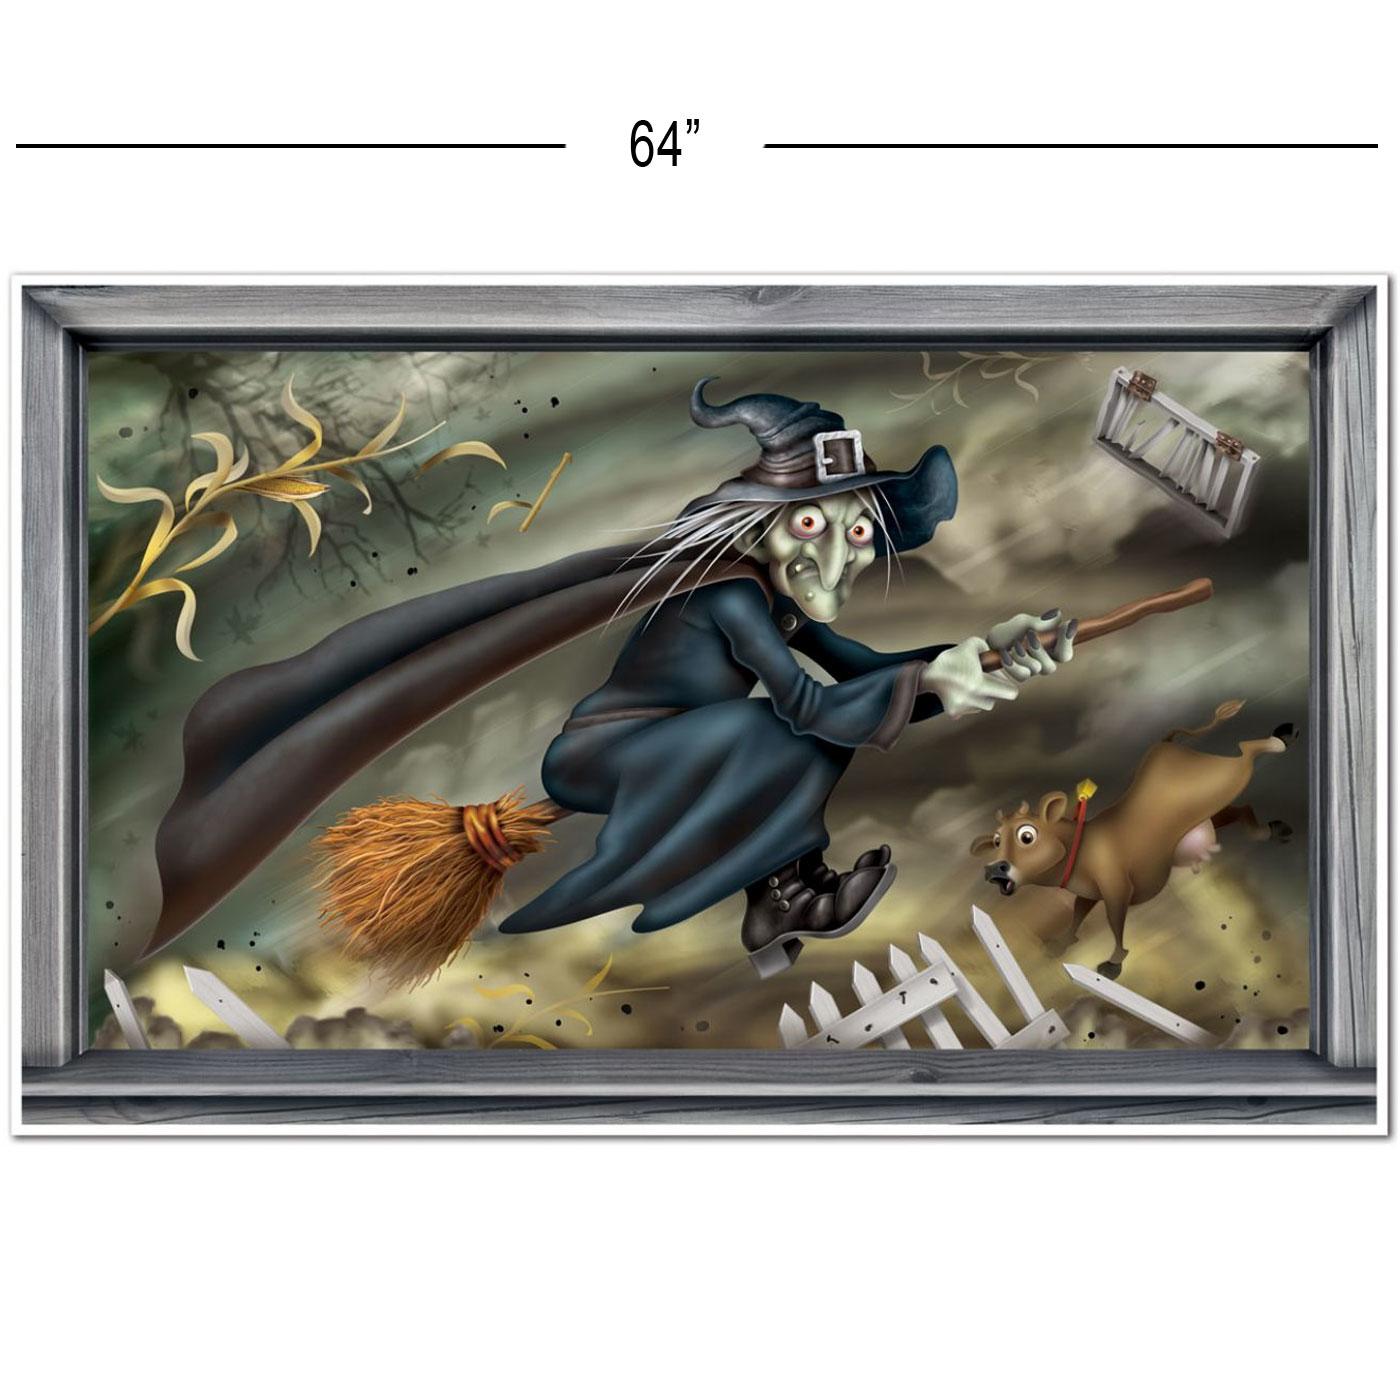 Flying Witch Insta-Mural - 5ft 4" x 3ft 4" by Beistle 00998 available here at Karnival Costumes online party shop